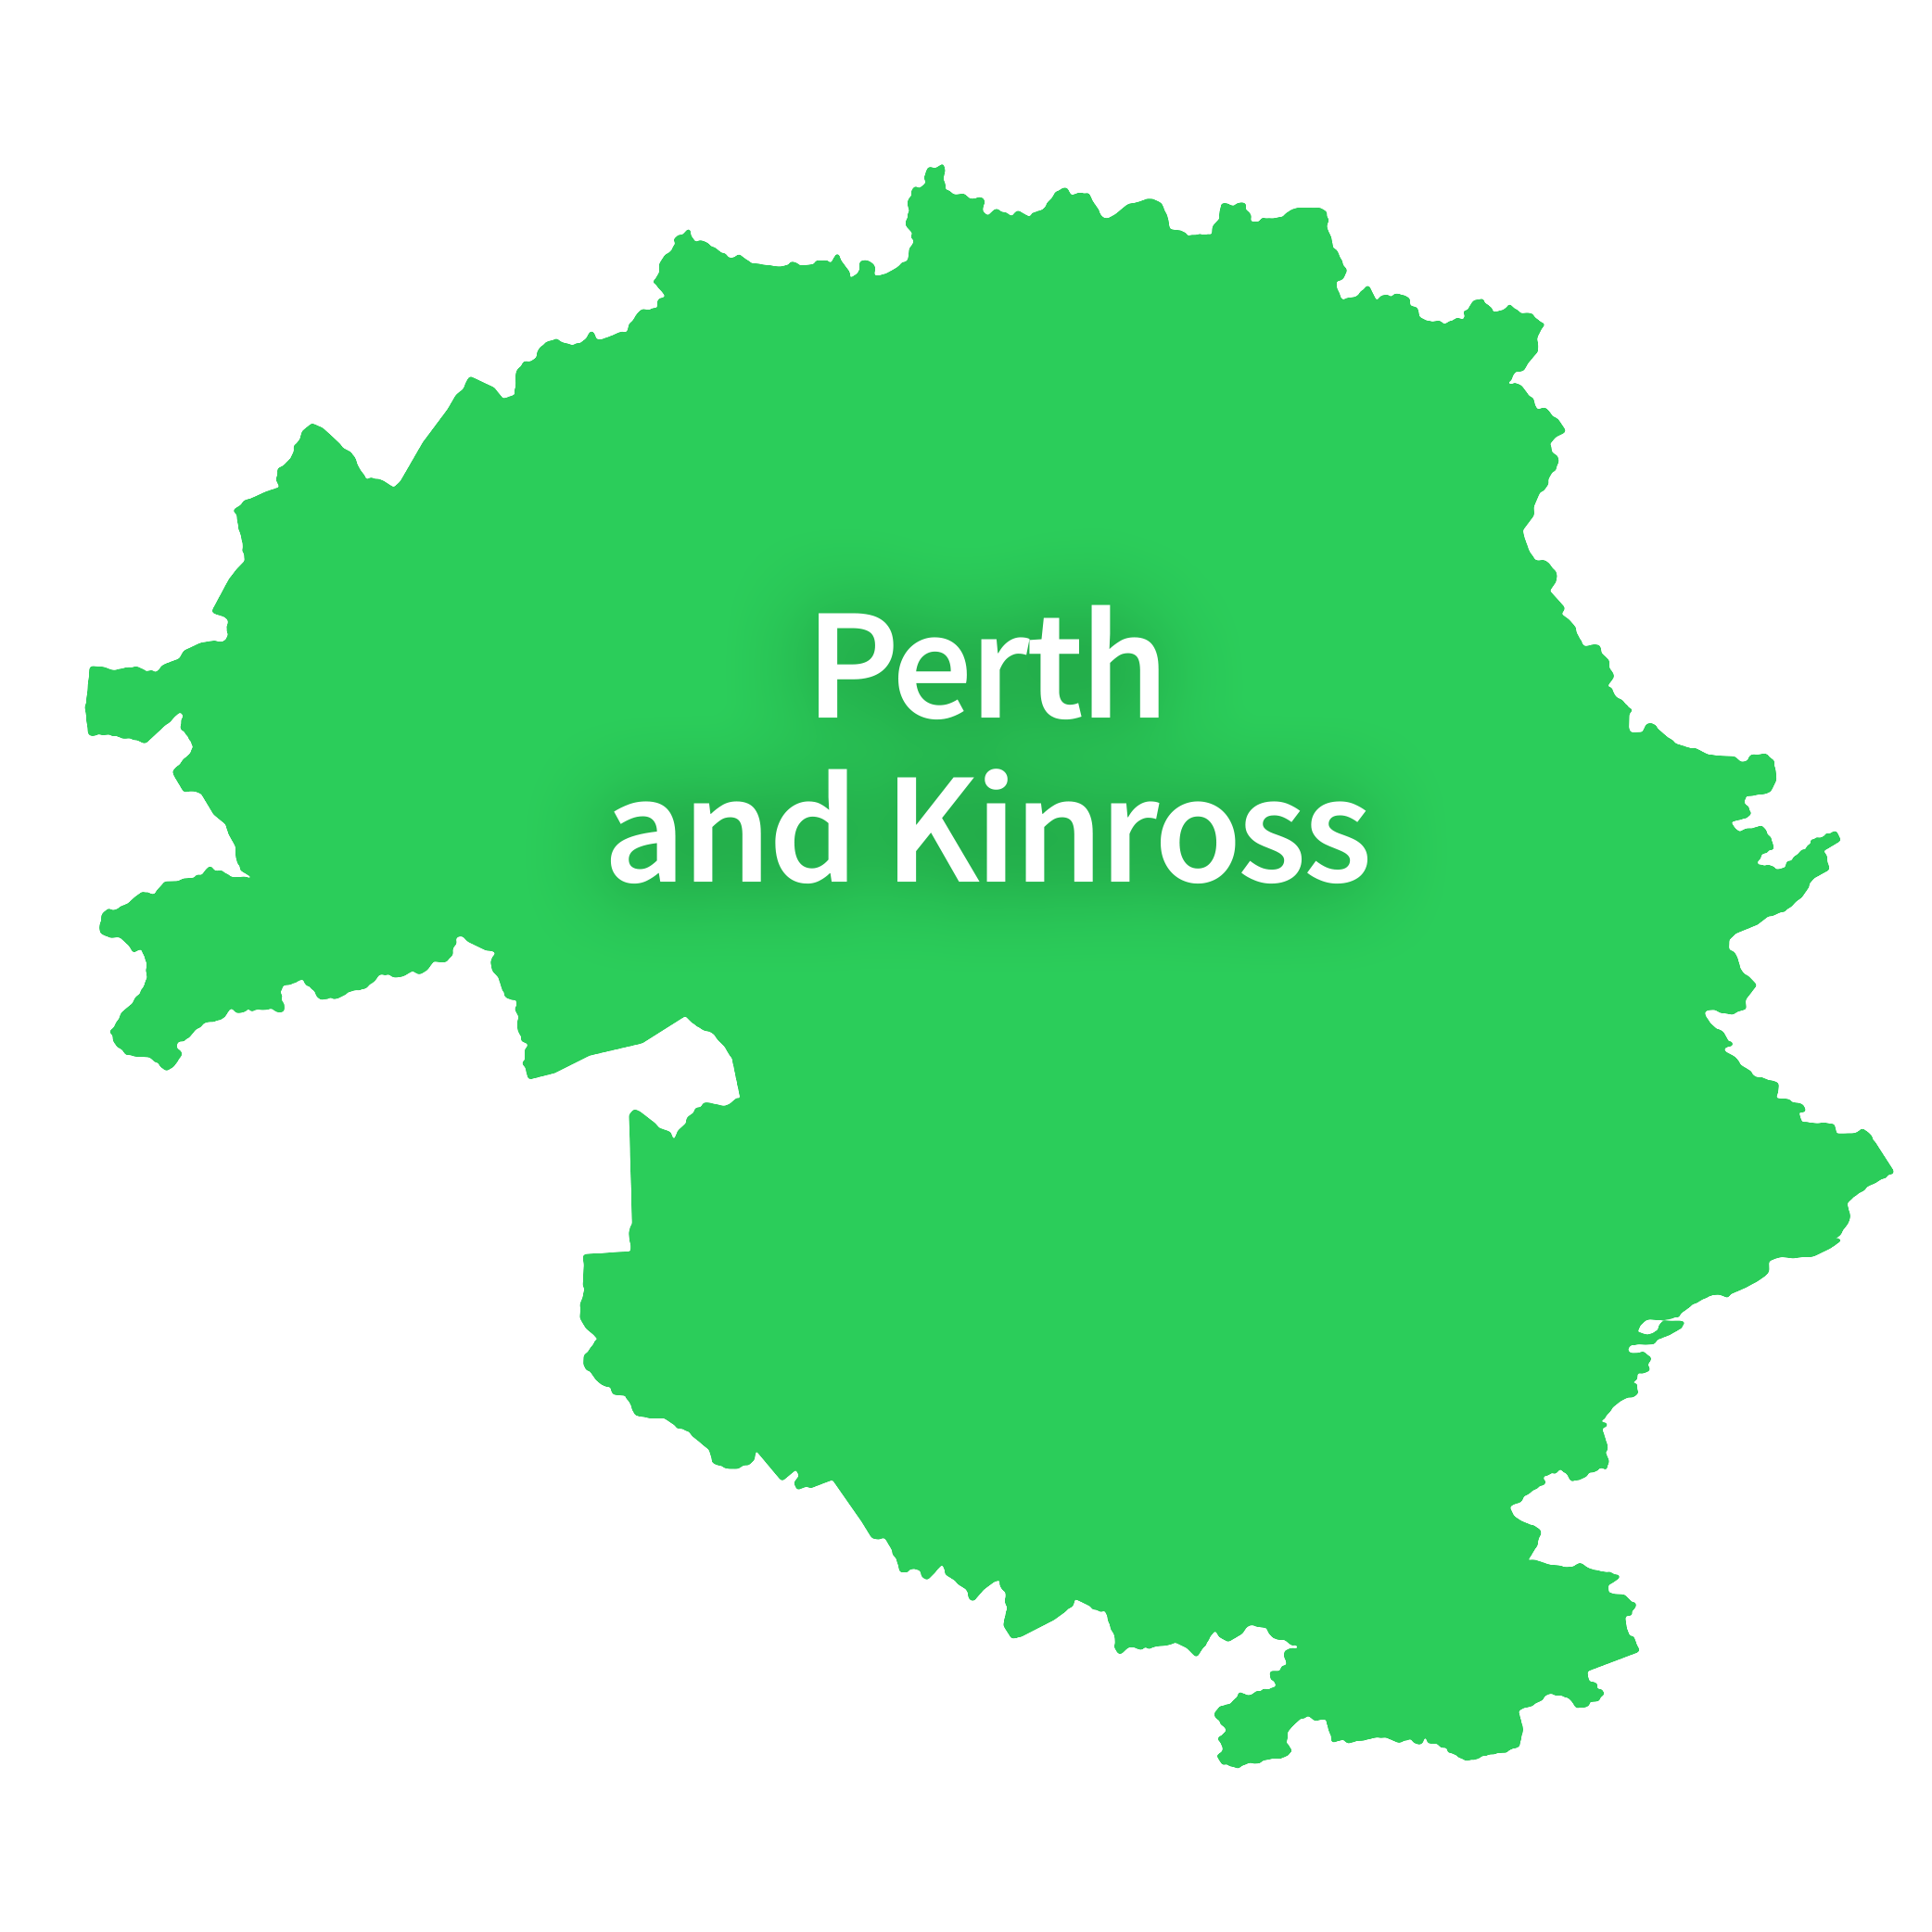 Map of Perth and Kinross